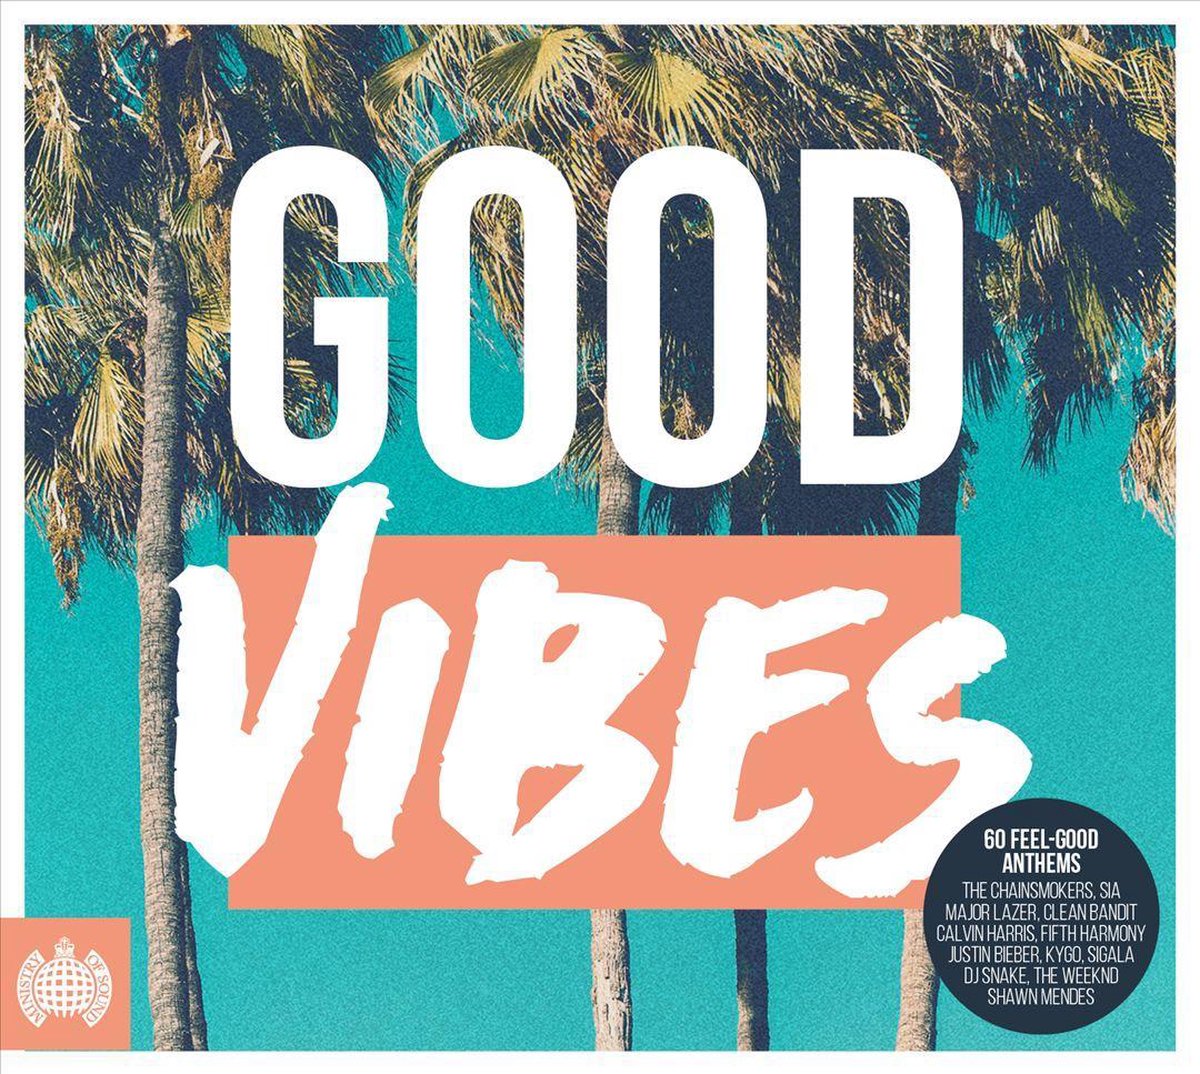 Good Vibes - Kungs